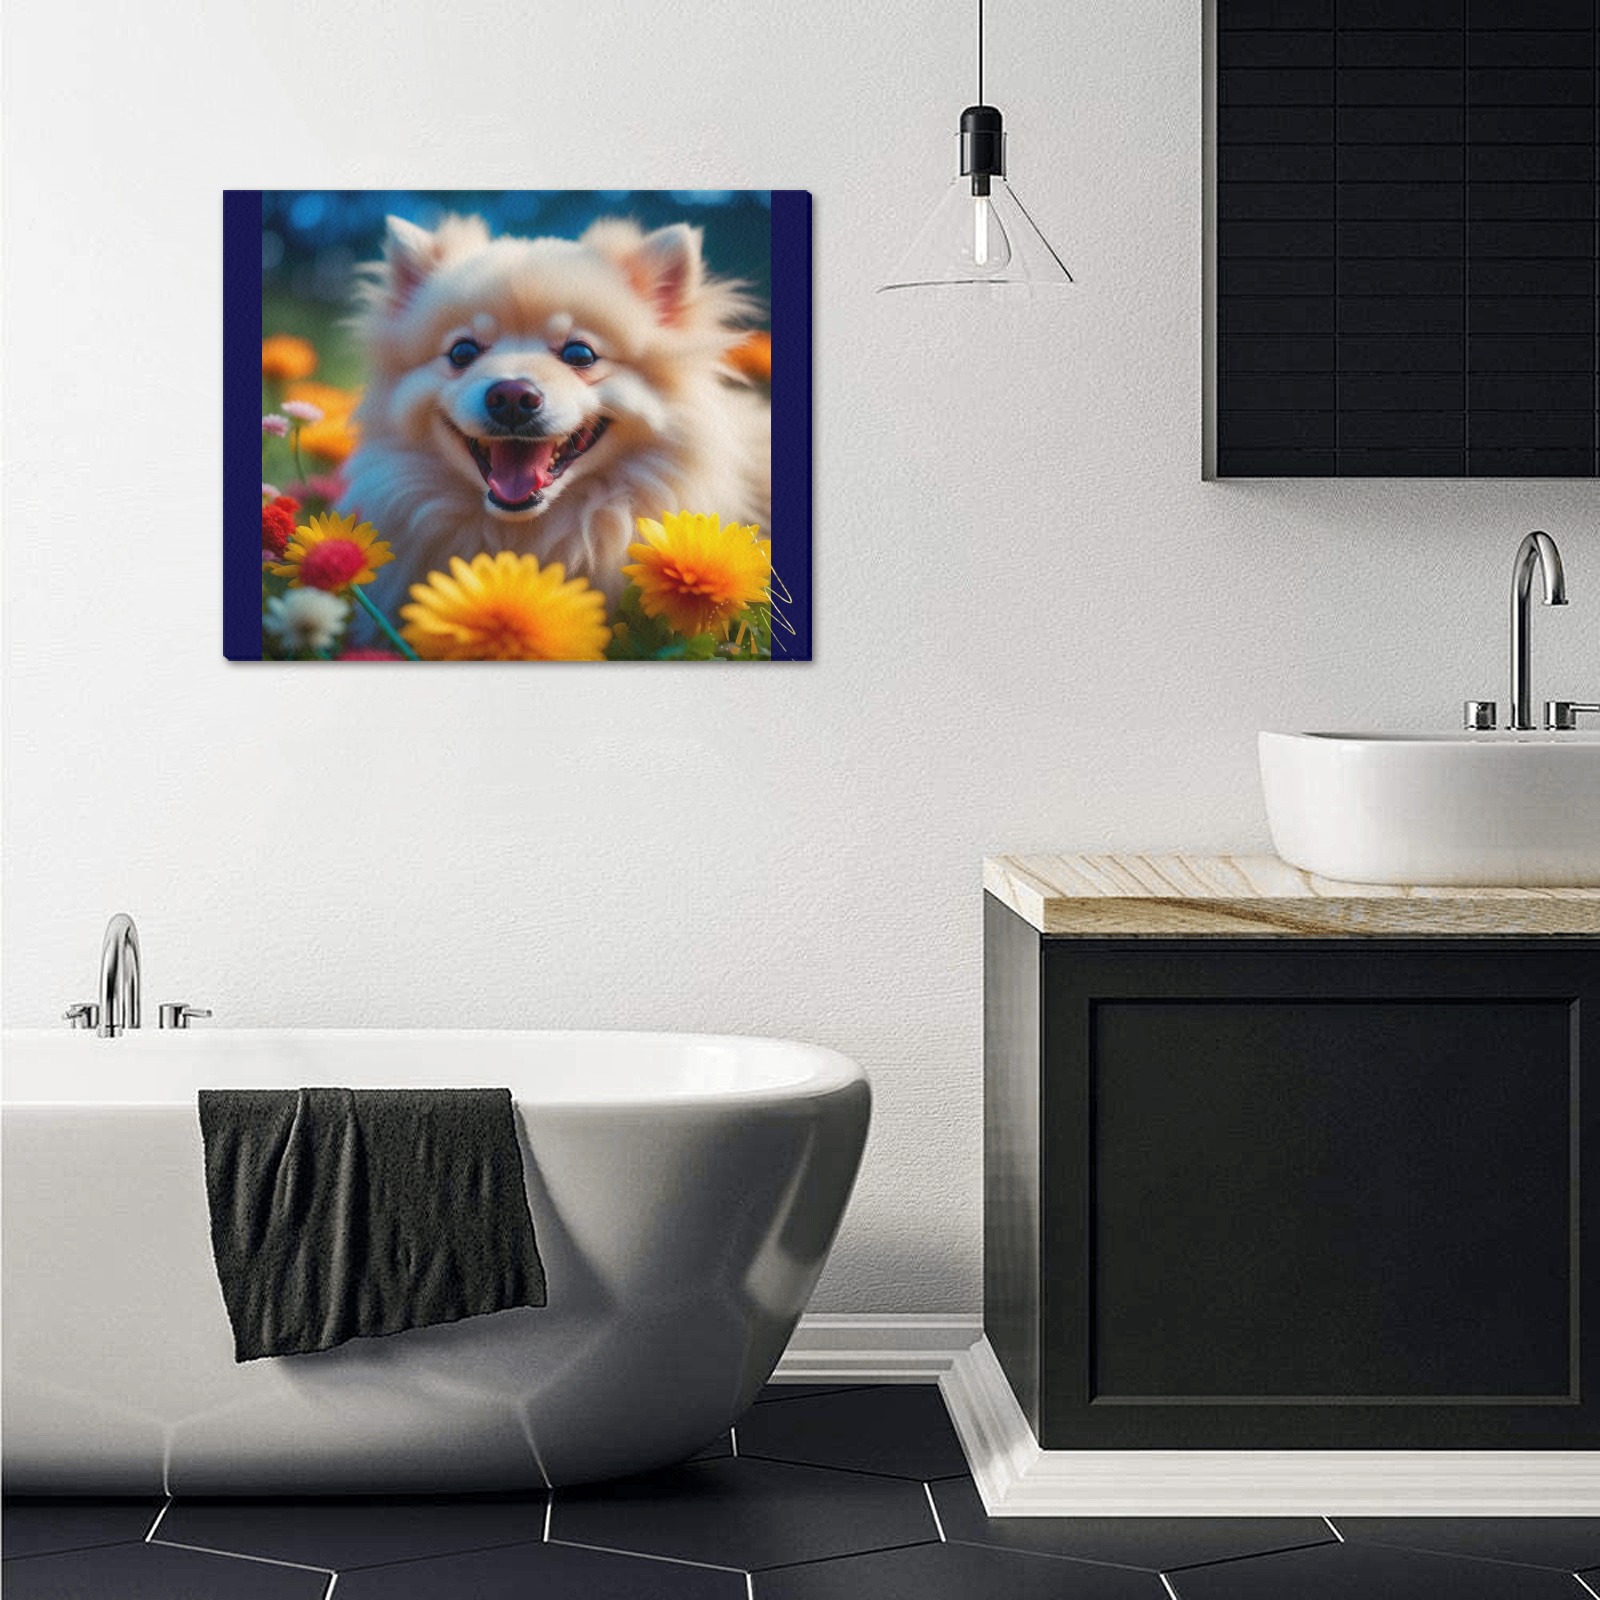 Cute smiley doggy Upgraded Canvas Print 20"x16"